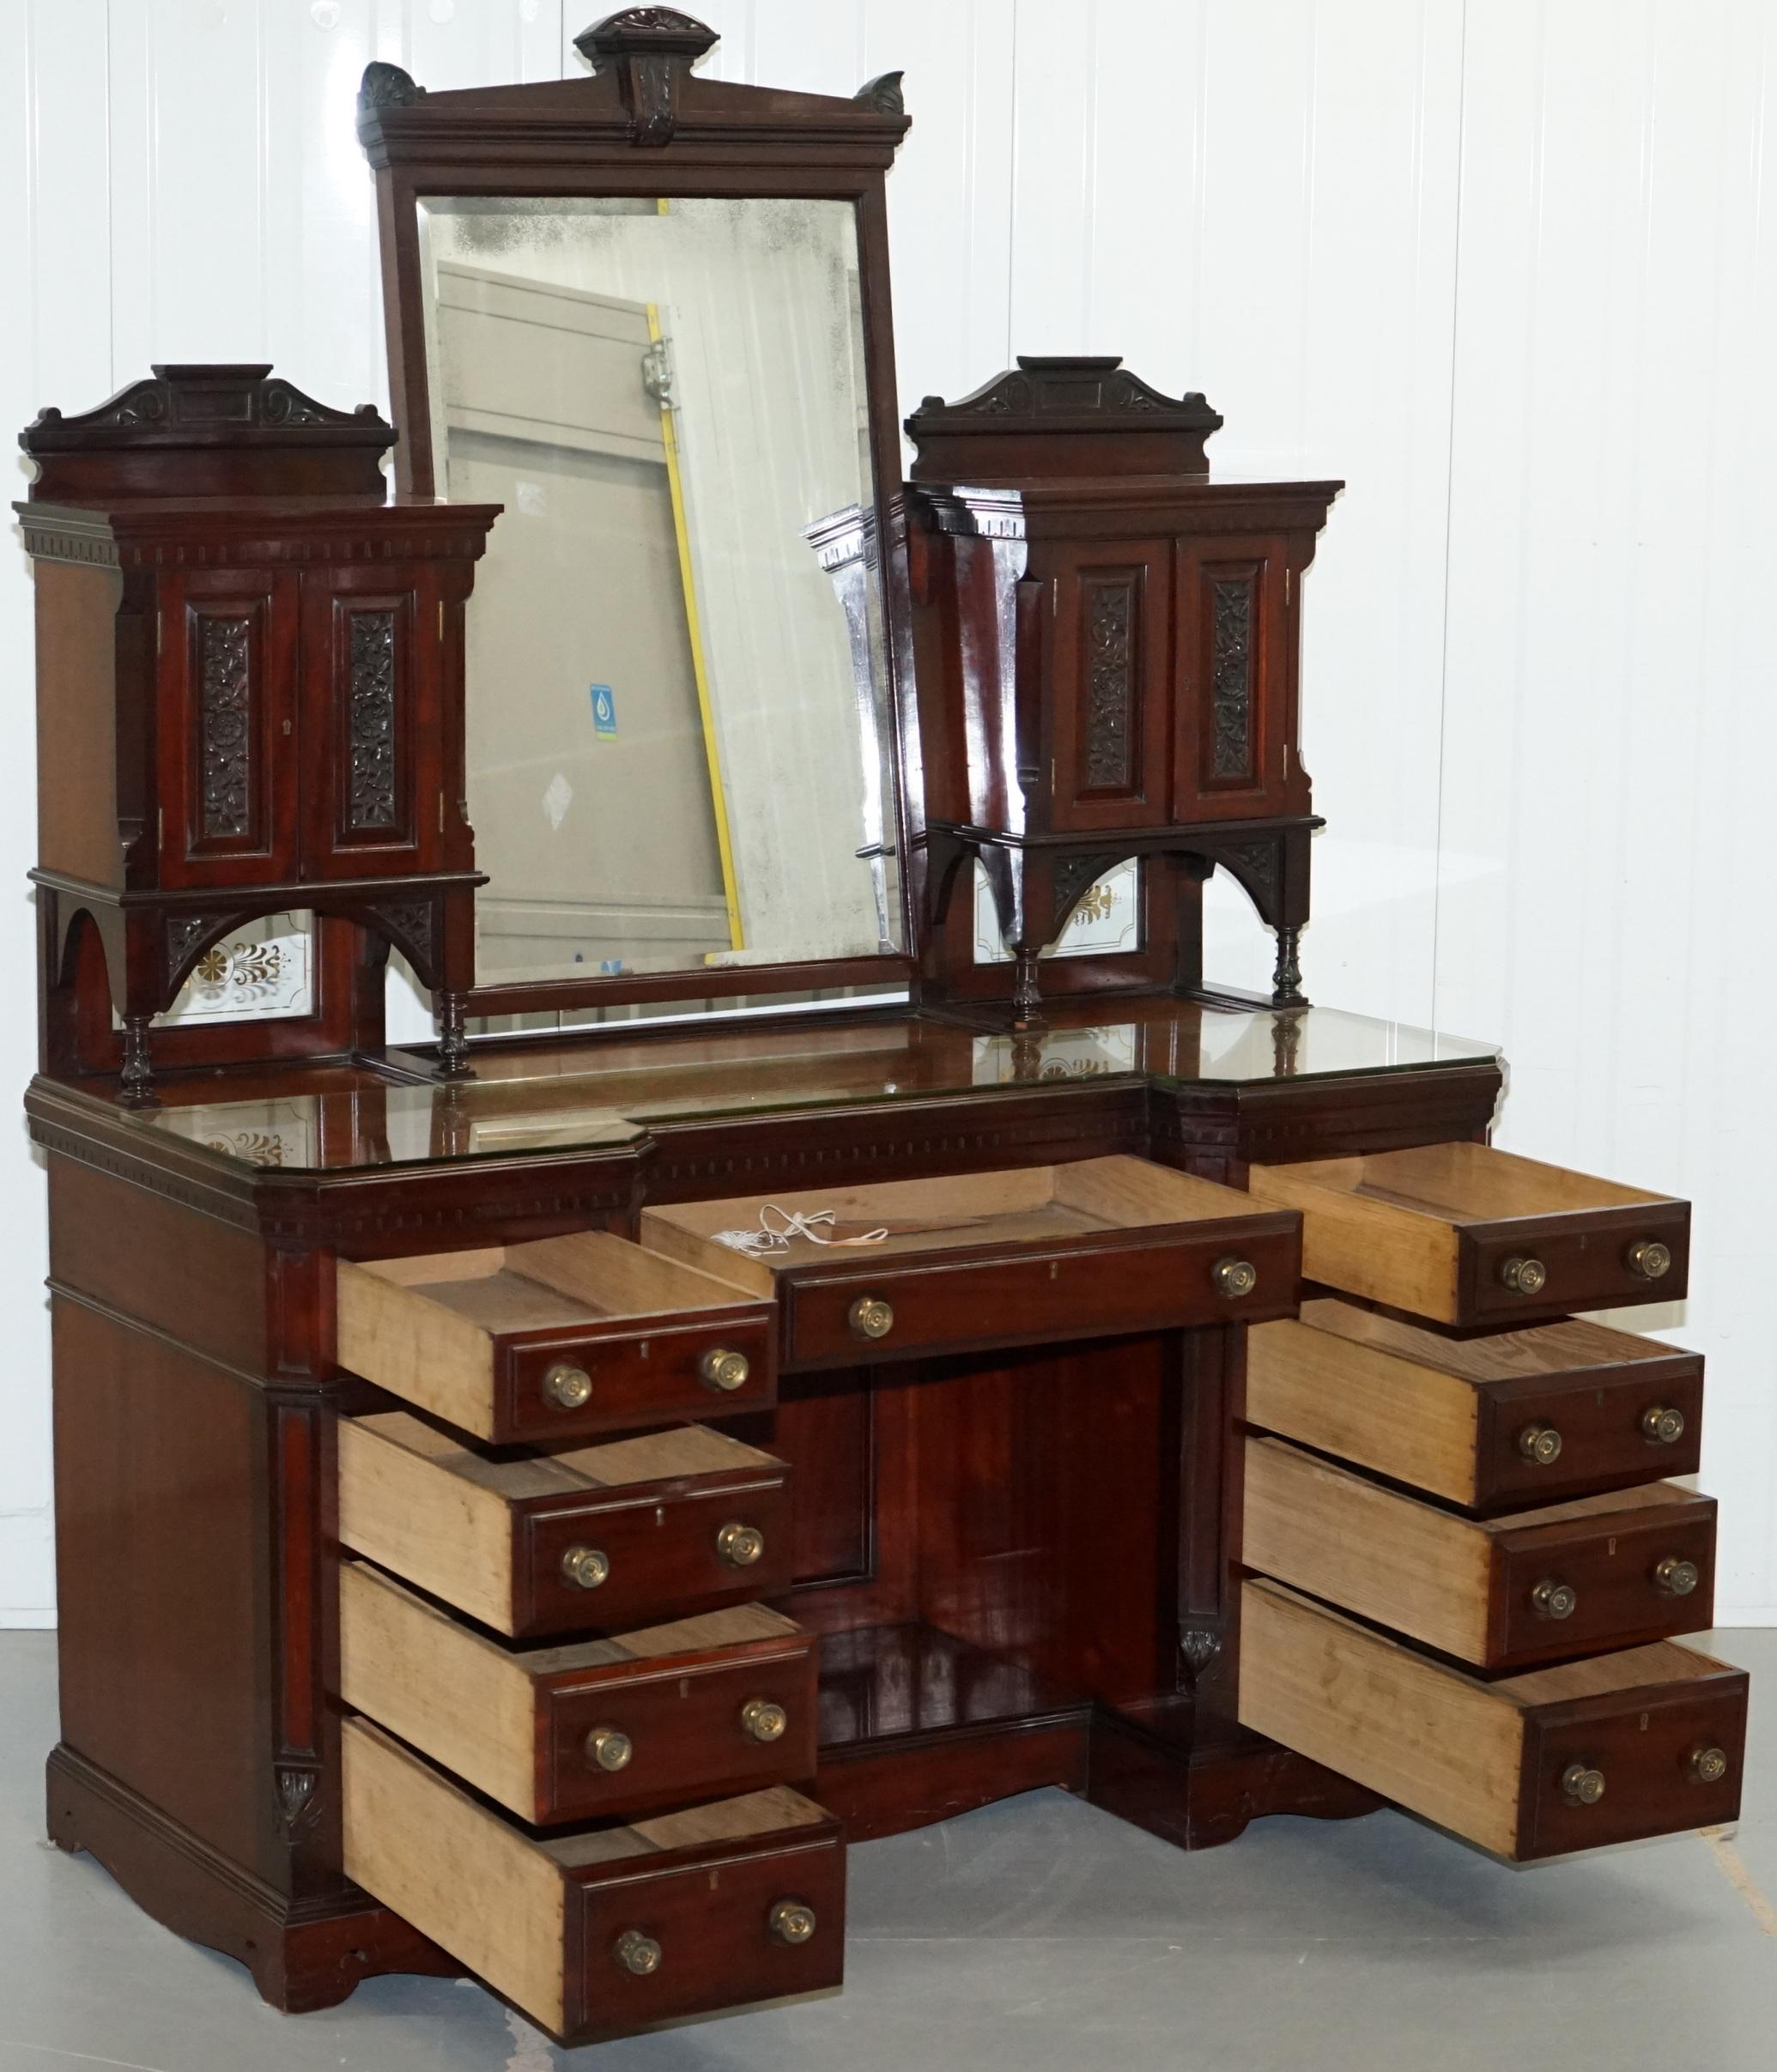 Ornate Grand Victorian Hardwood Dressing Table Loads of Drawers Storage Space 6